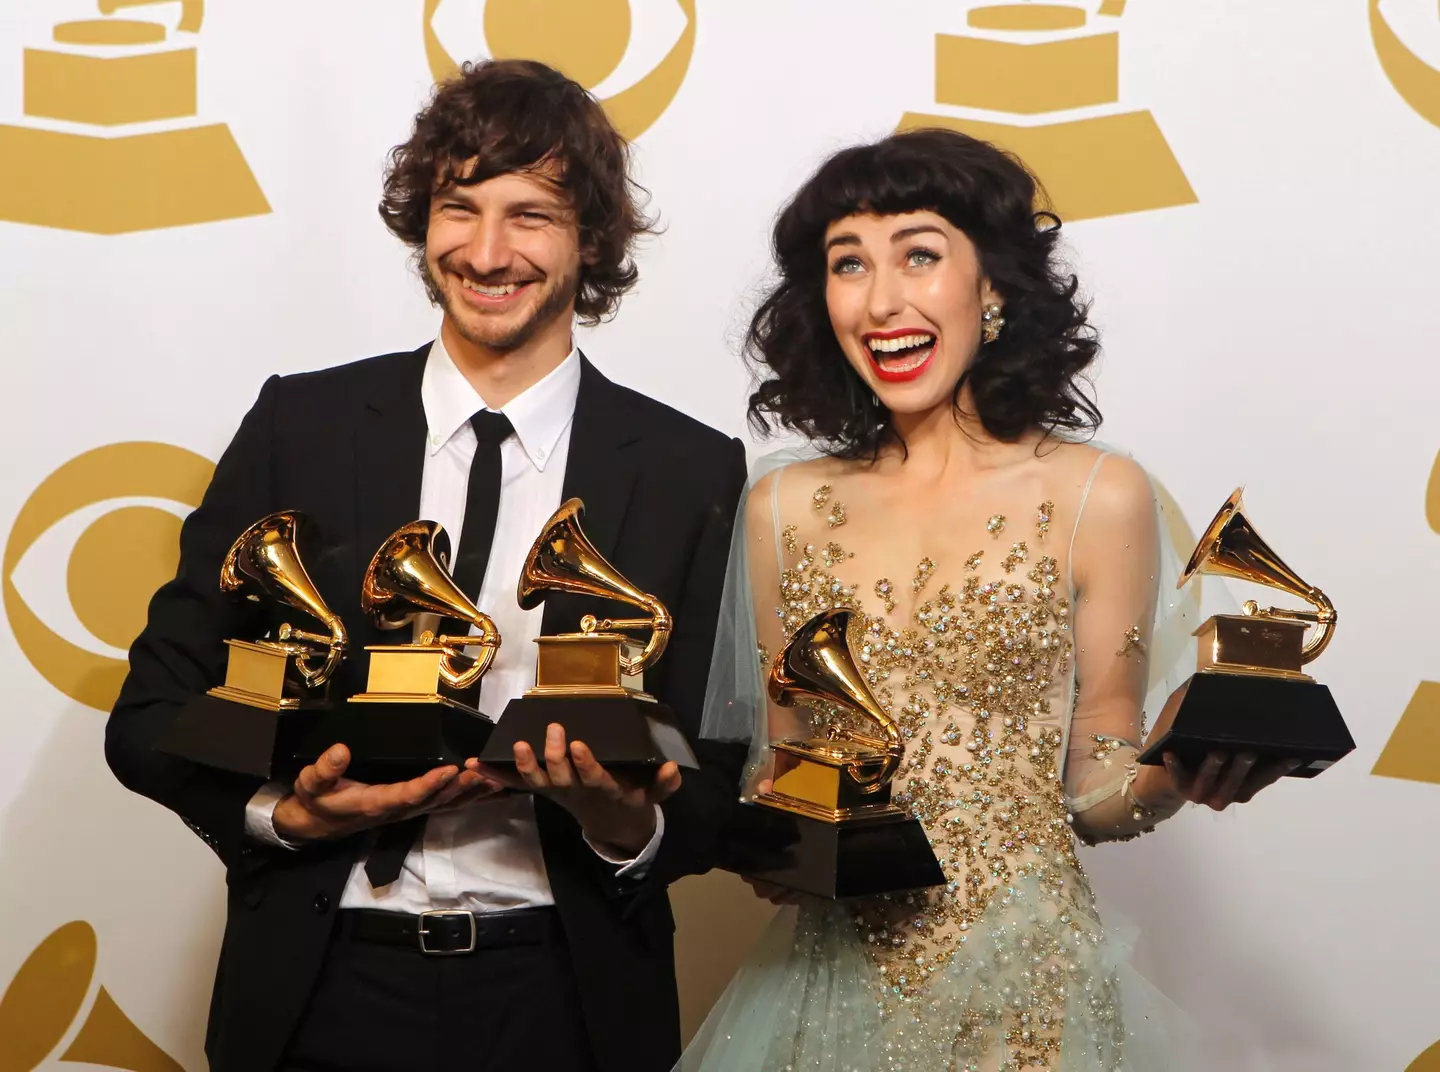 Gotye (left) and Kimbra (right) won Grammy Awards for the song.